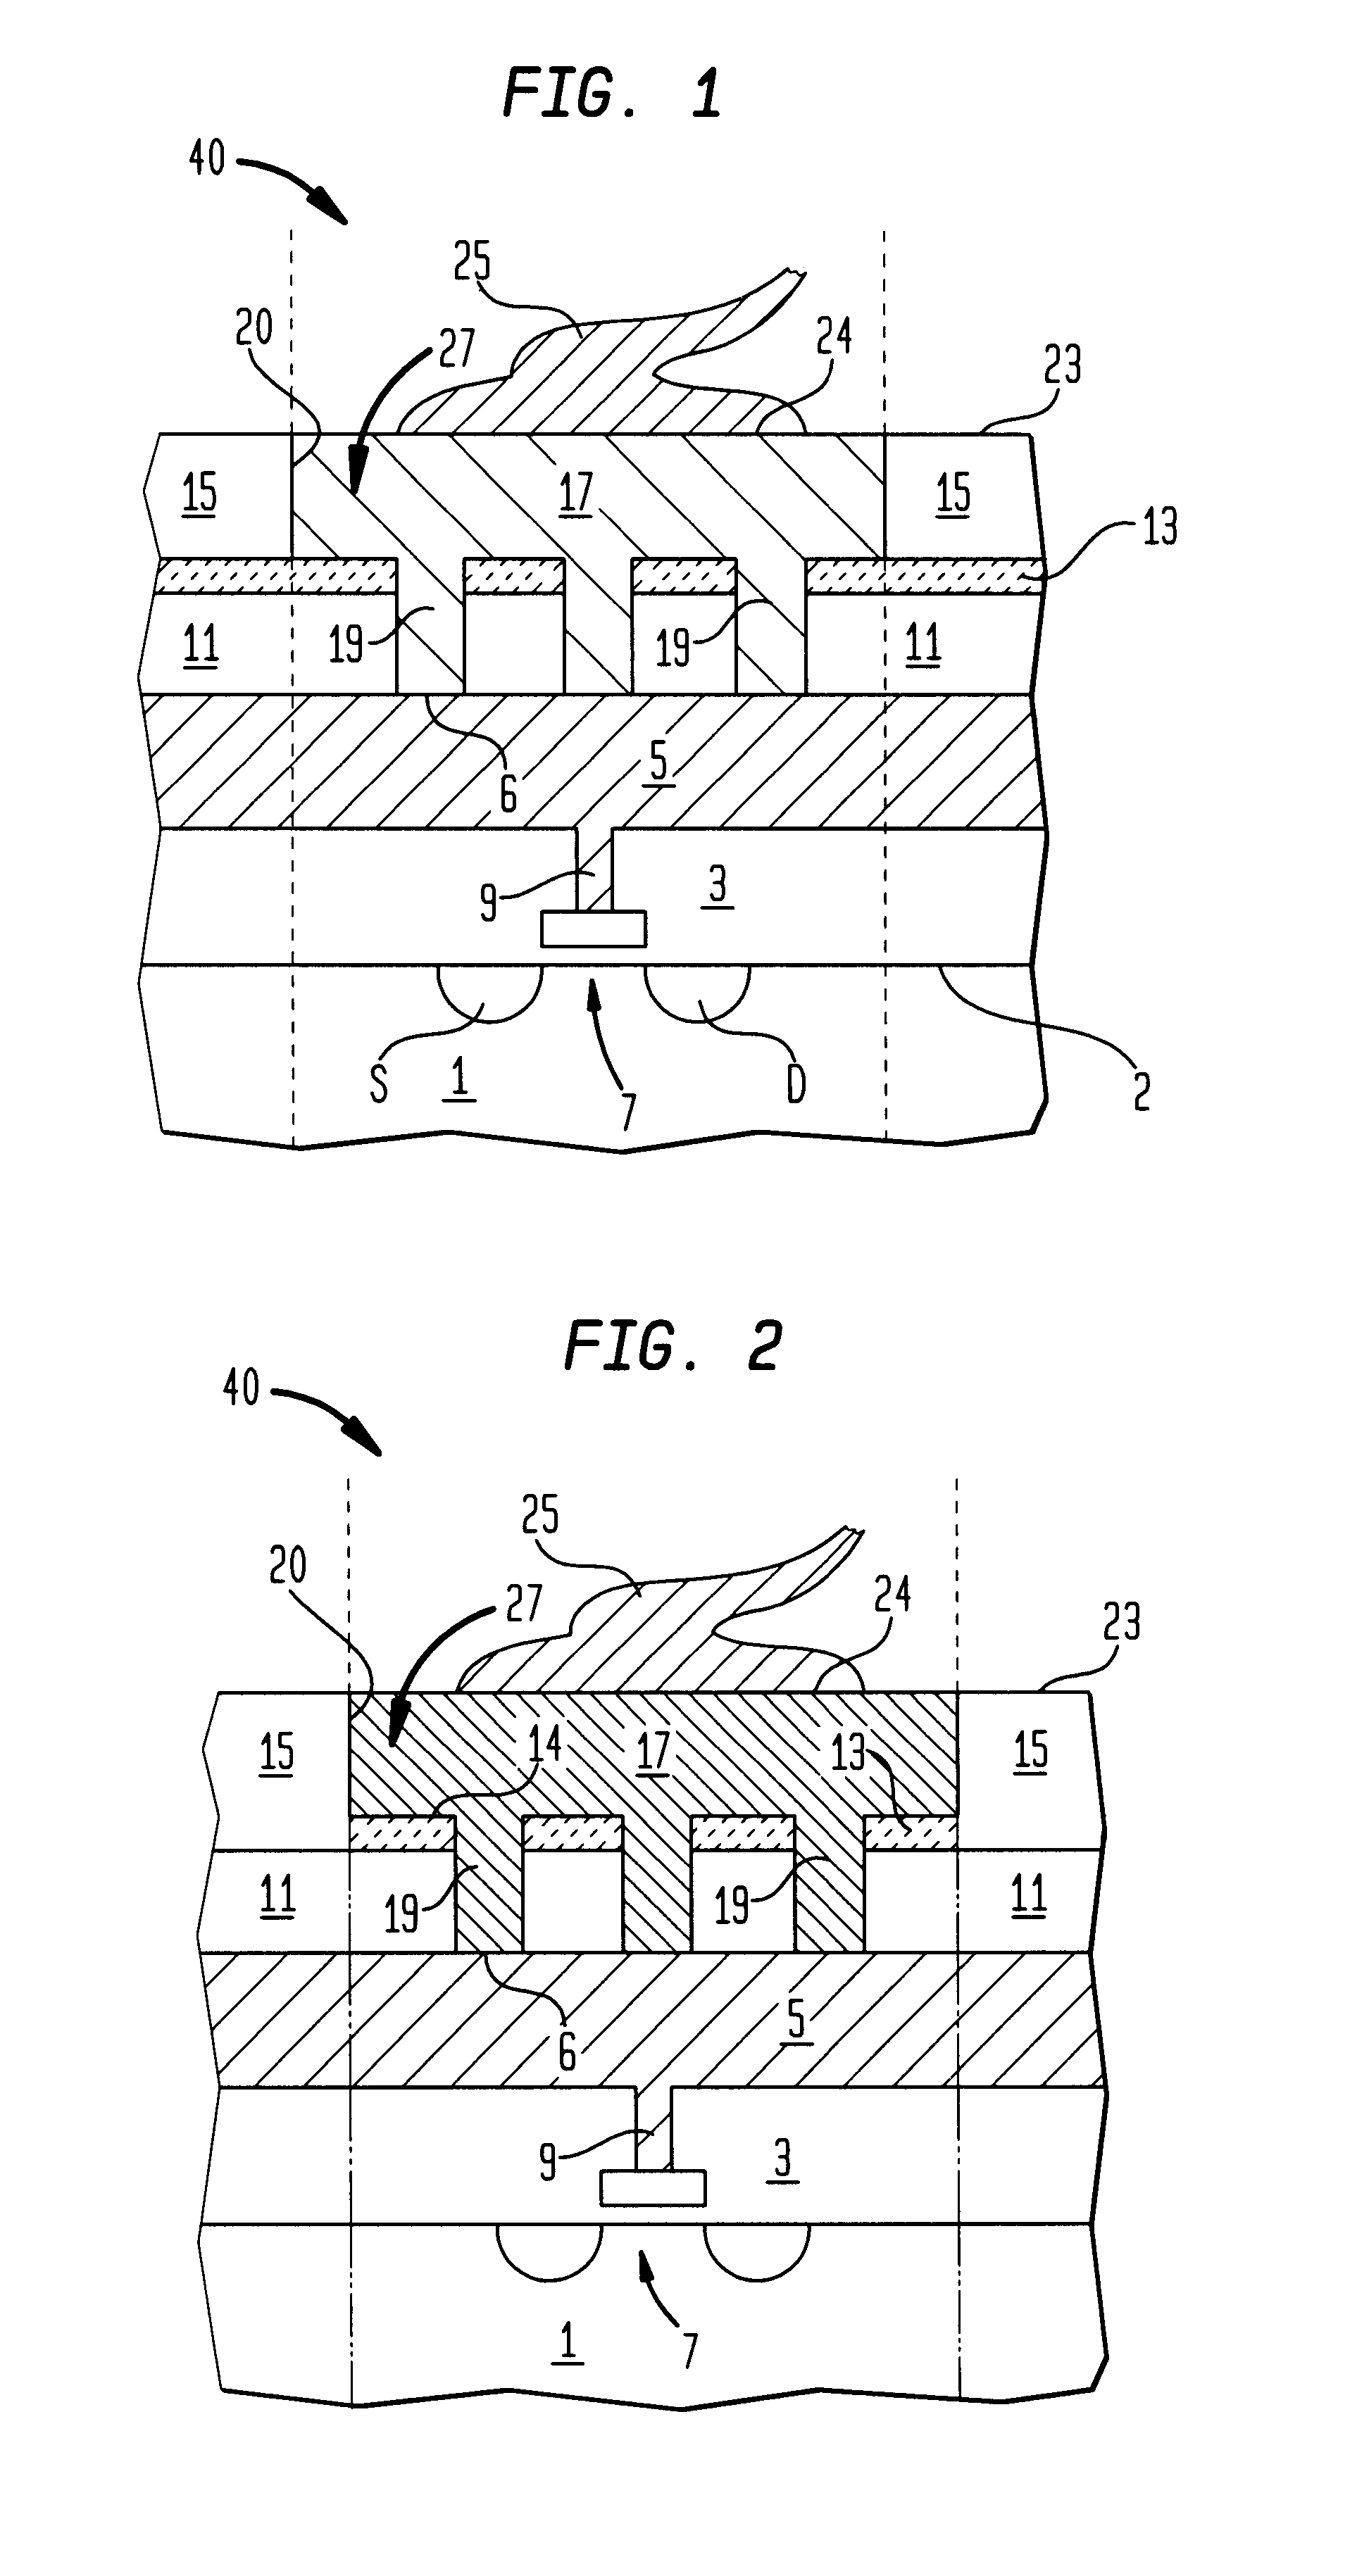 Dual damascene bond pad structure for lowering stress and allowing circuitry under pads